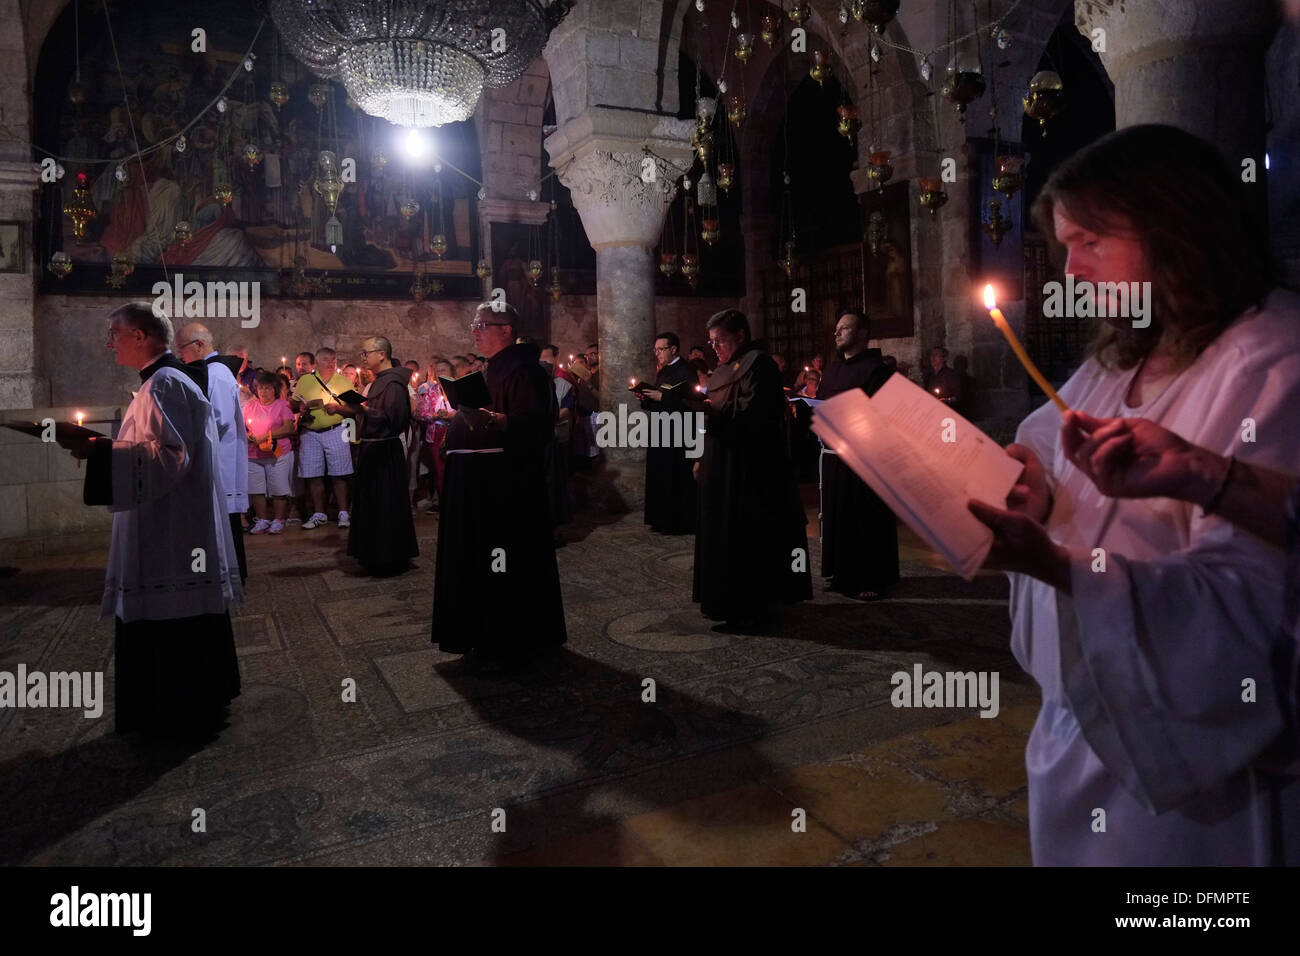 Franciscan priests and friars taking part in a Roman catholic mass procession at the Chapel of St. Helena inside the Holy Sepulchre church in the Christian quarter old city East Jerusalem Israel Stock Photo